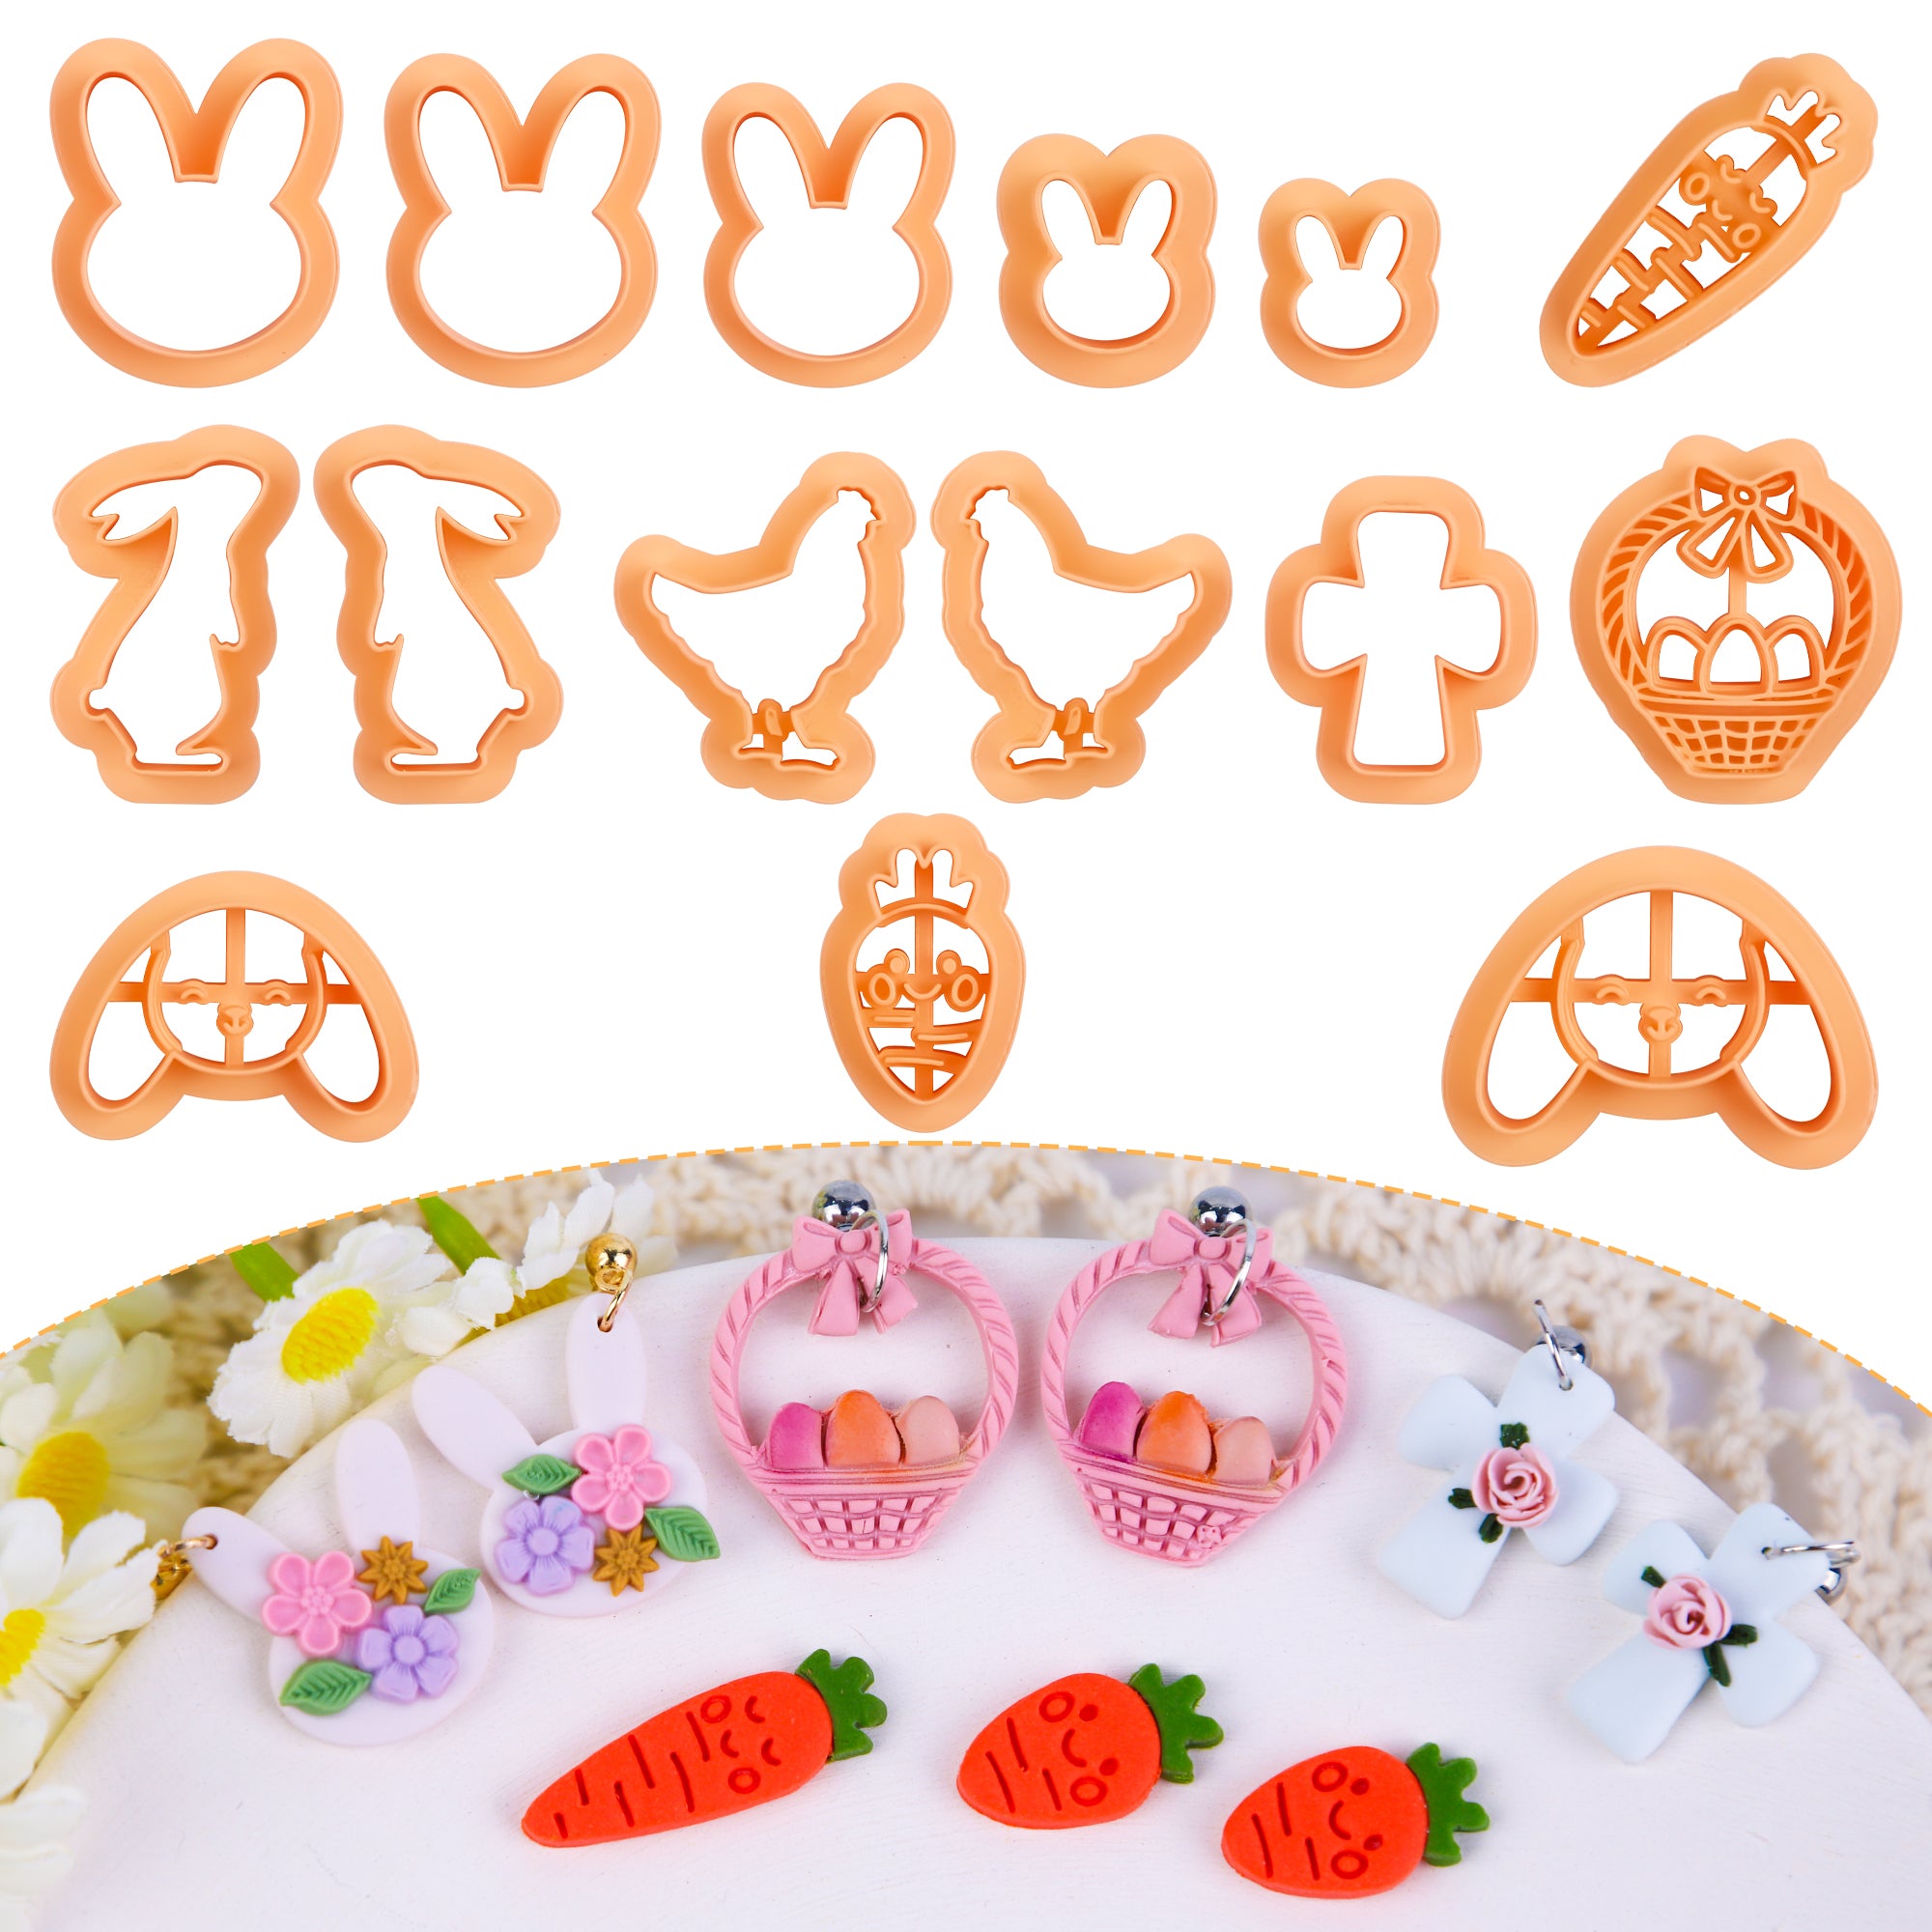 Puocaon Easter Polymer Clay Cutters - 15 Pcs Clay Cutters for Easter P